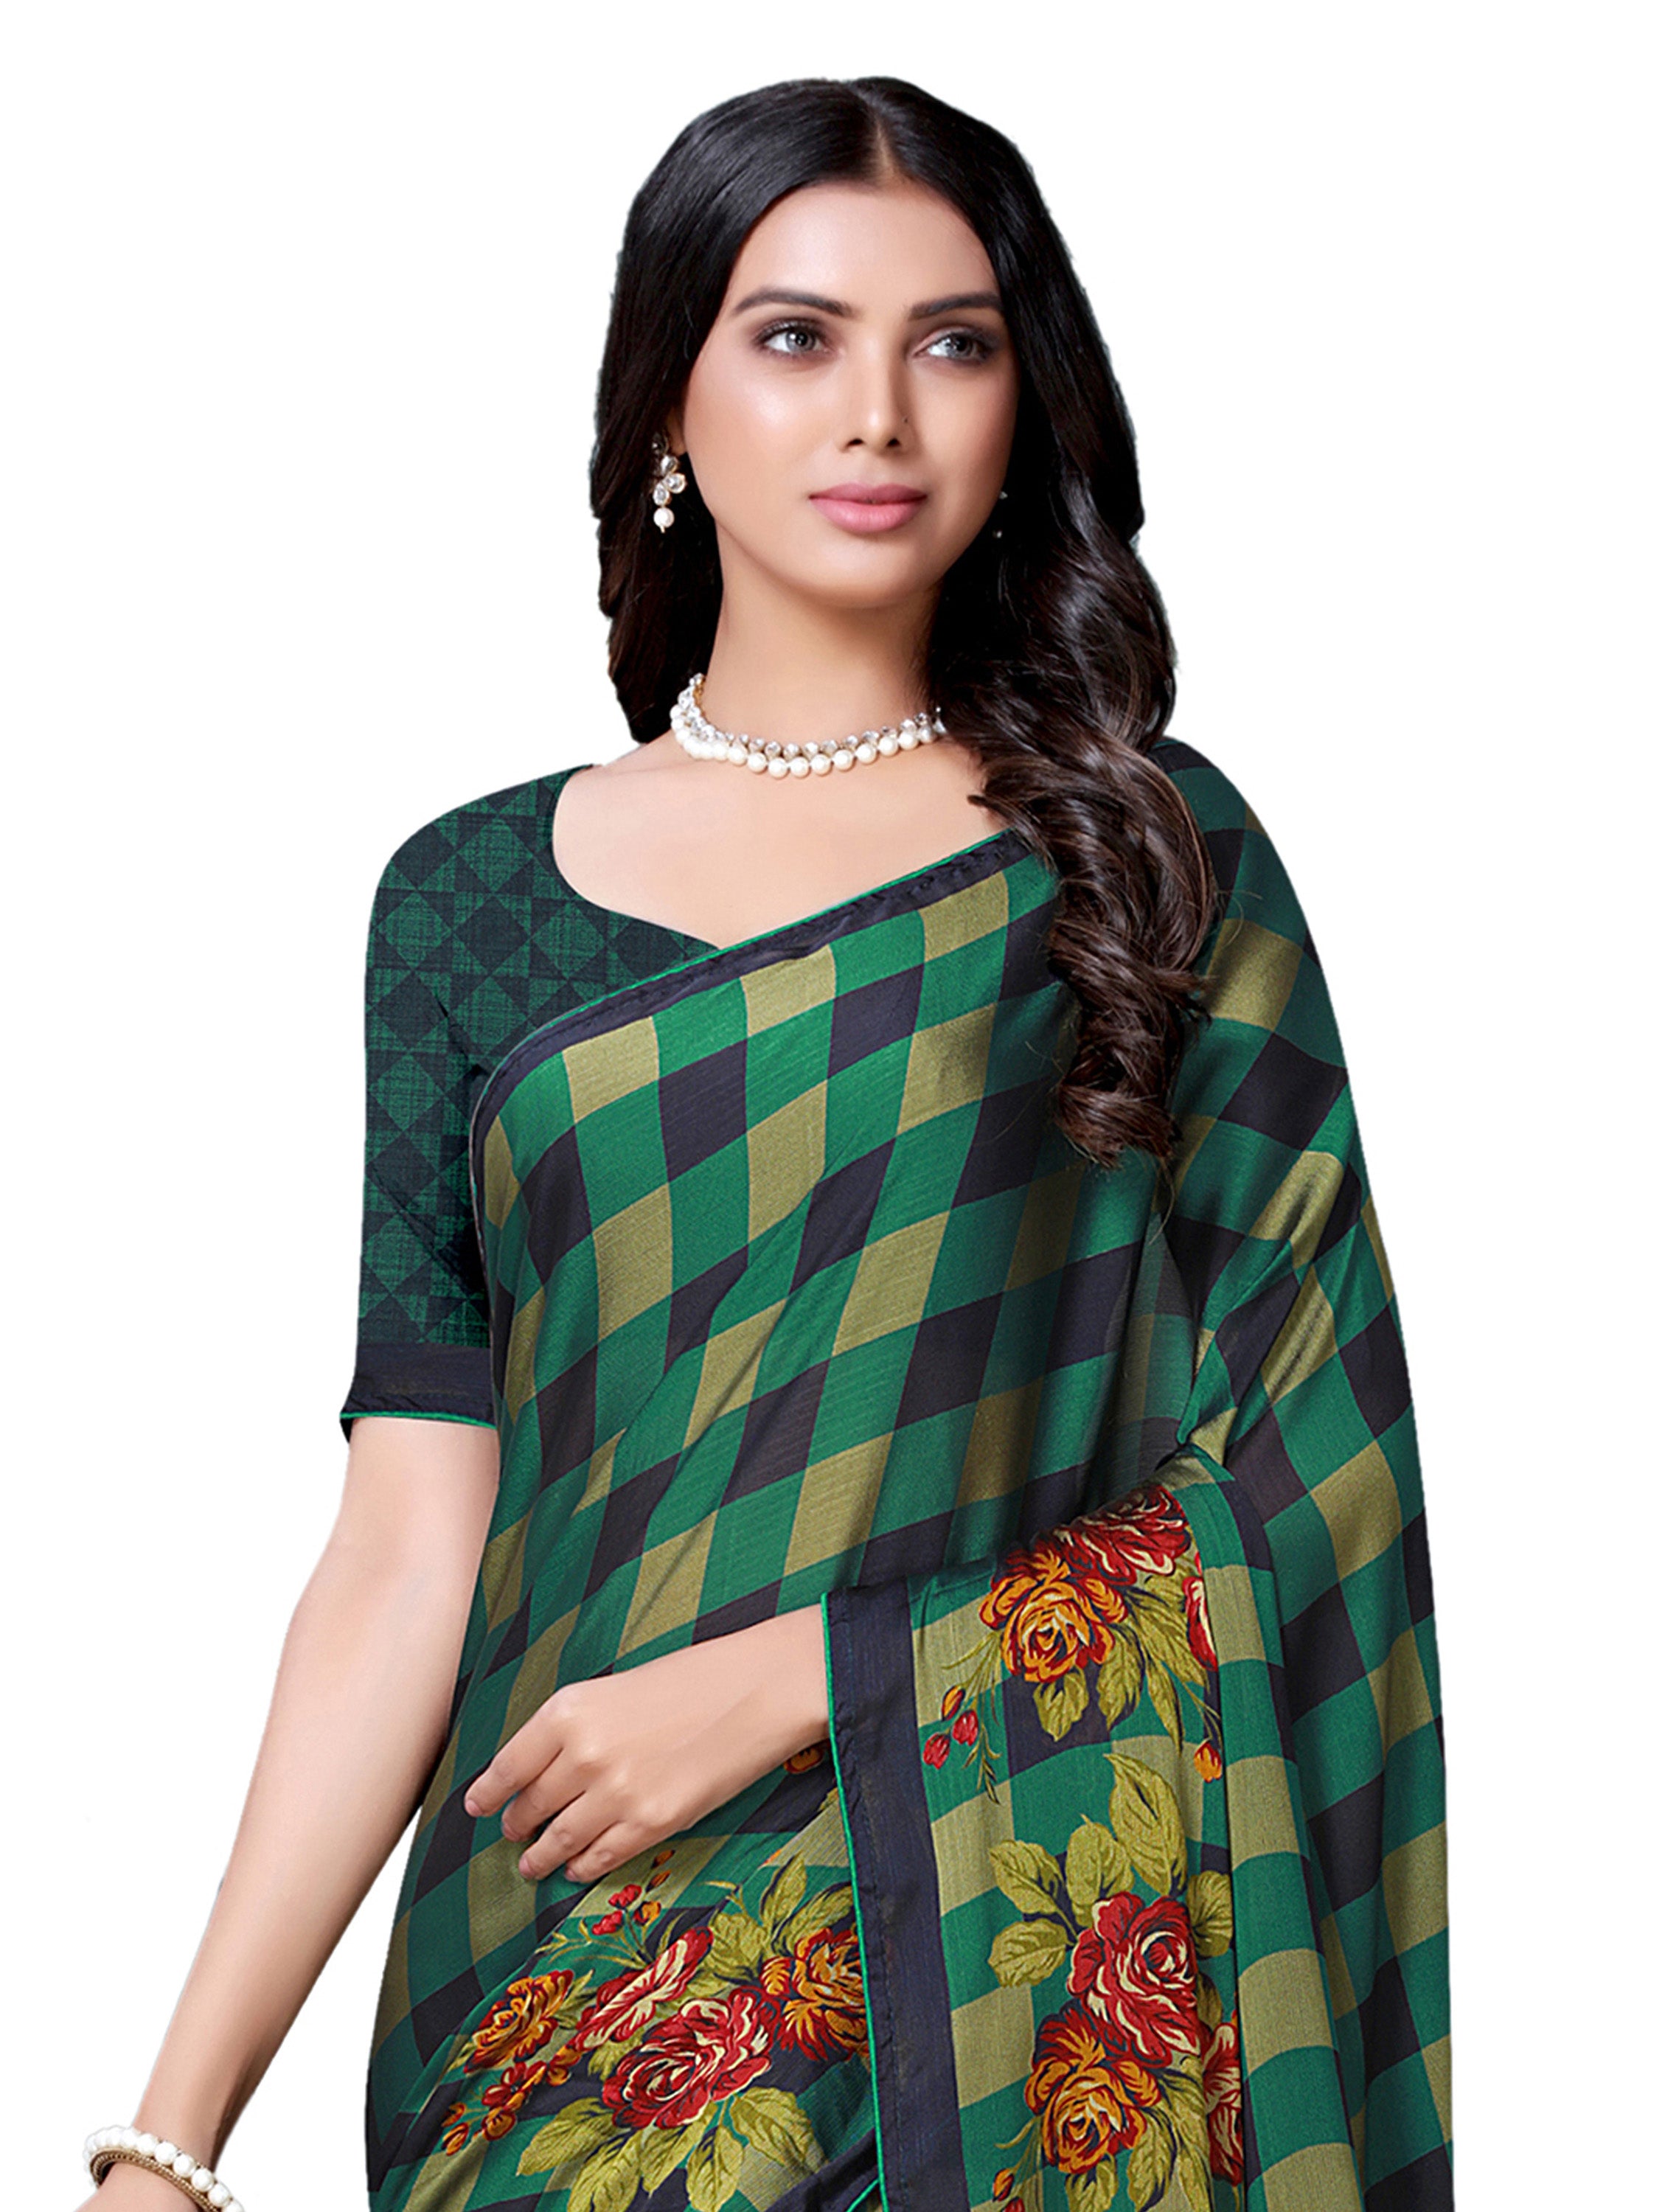 Women's Multi Color  Desinger China Chifon With Piping And Lace Saree - Vamika